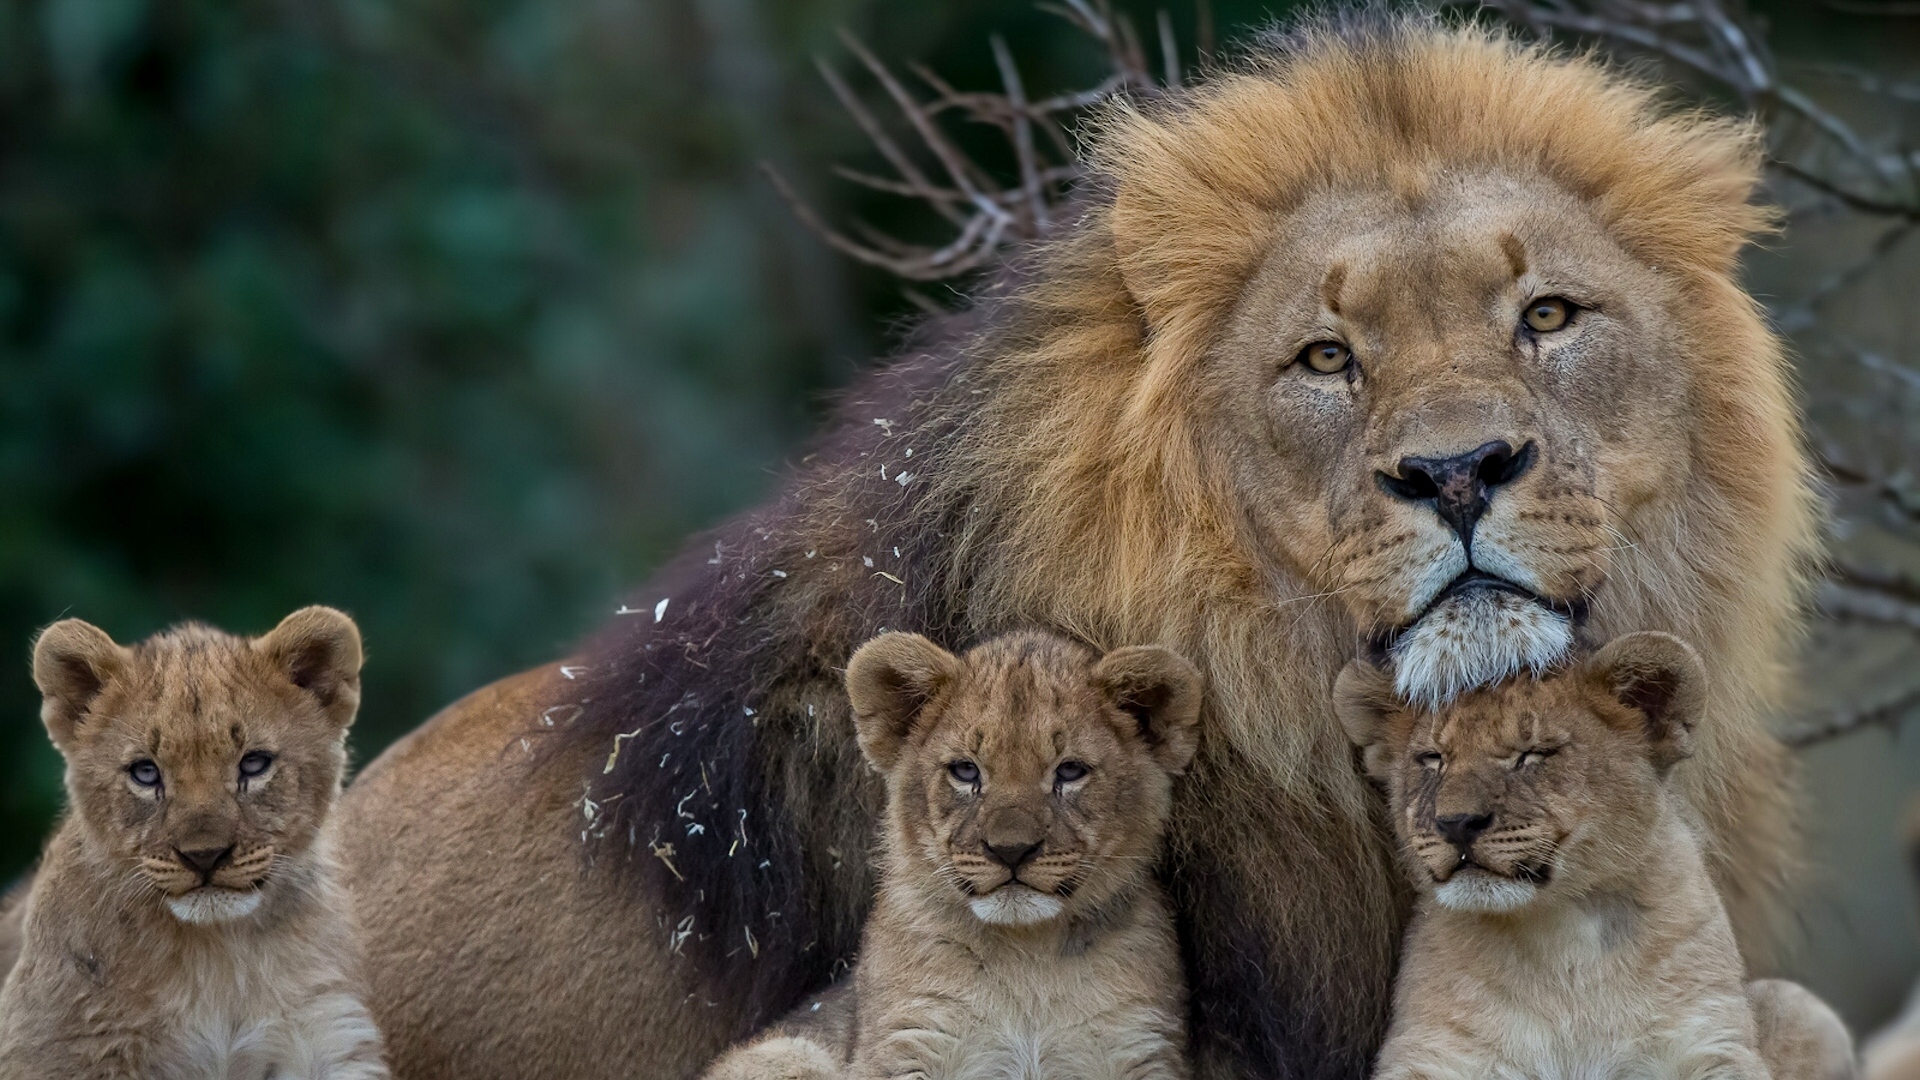 Male Lion With 3 Cubs - HD Wallpaper 